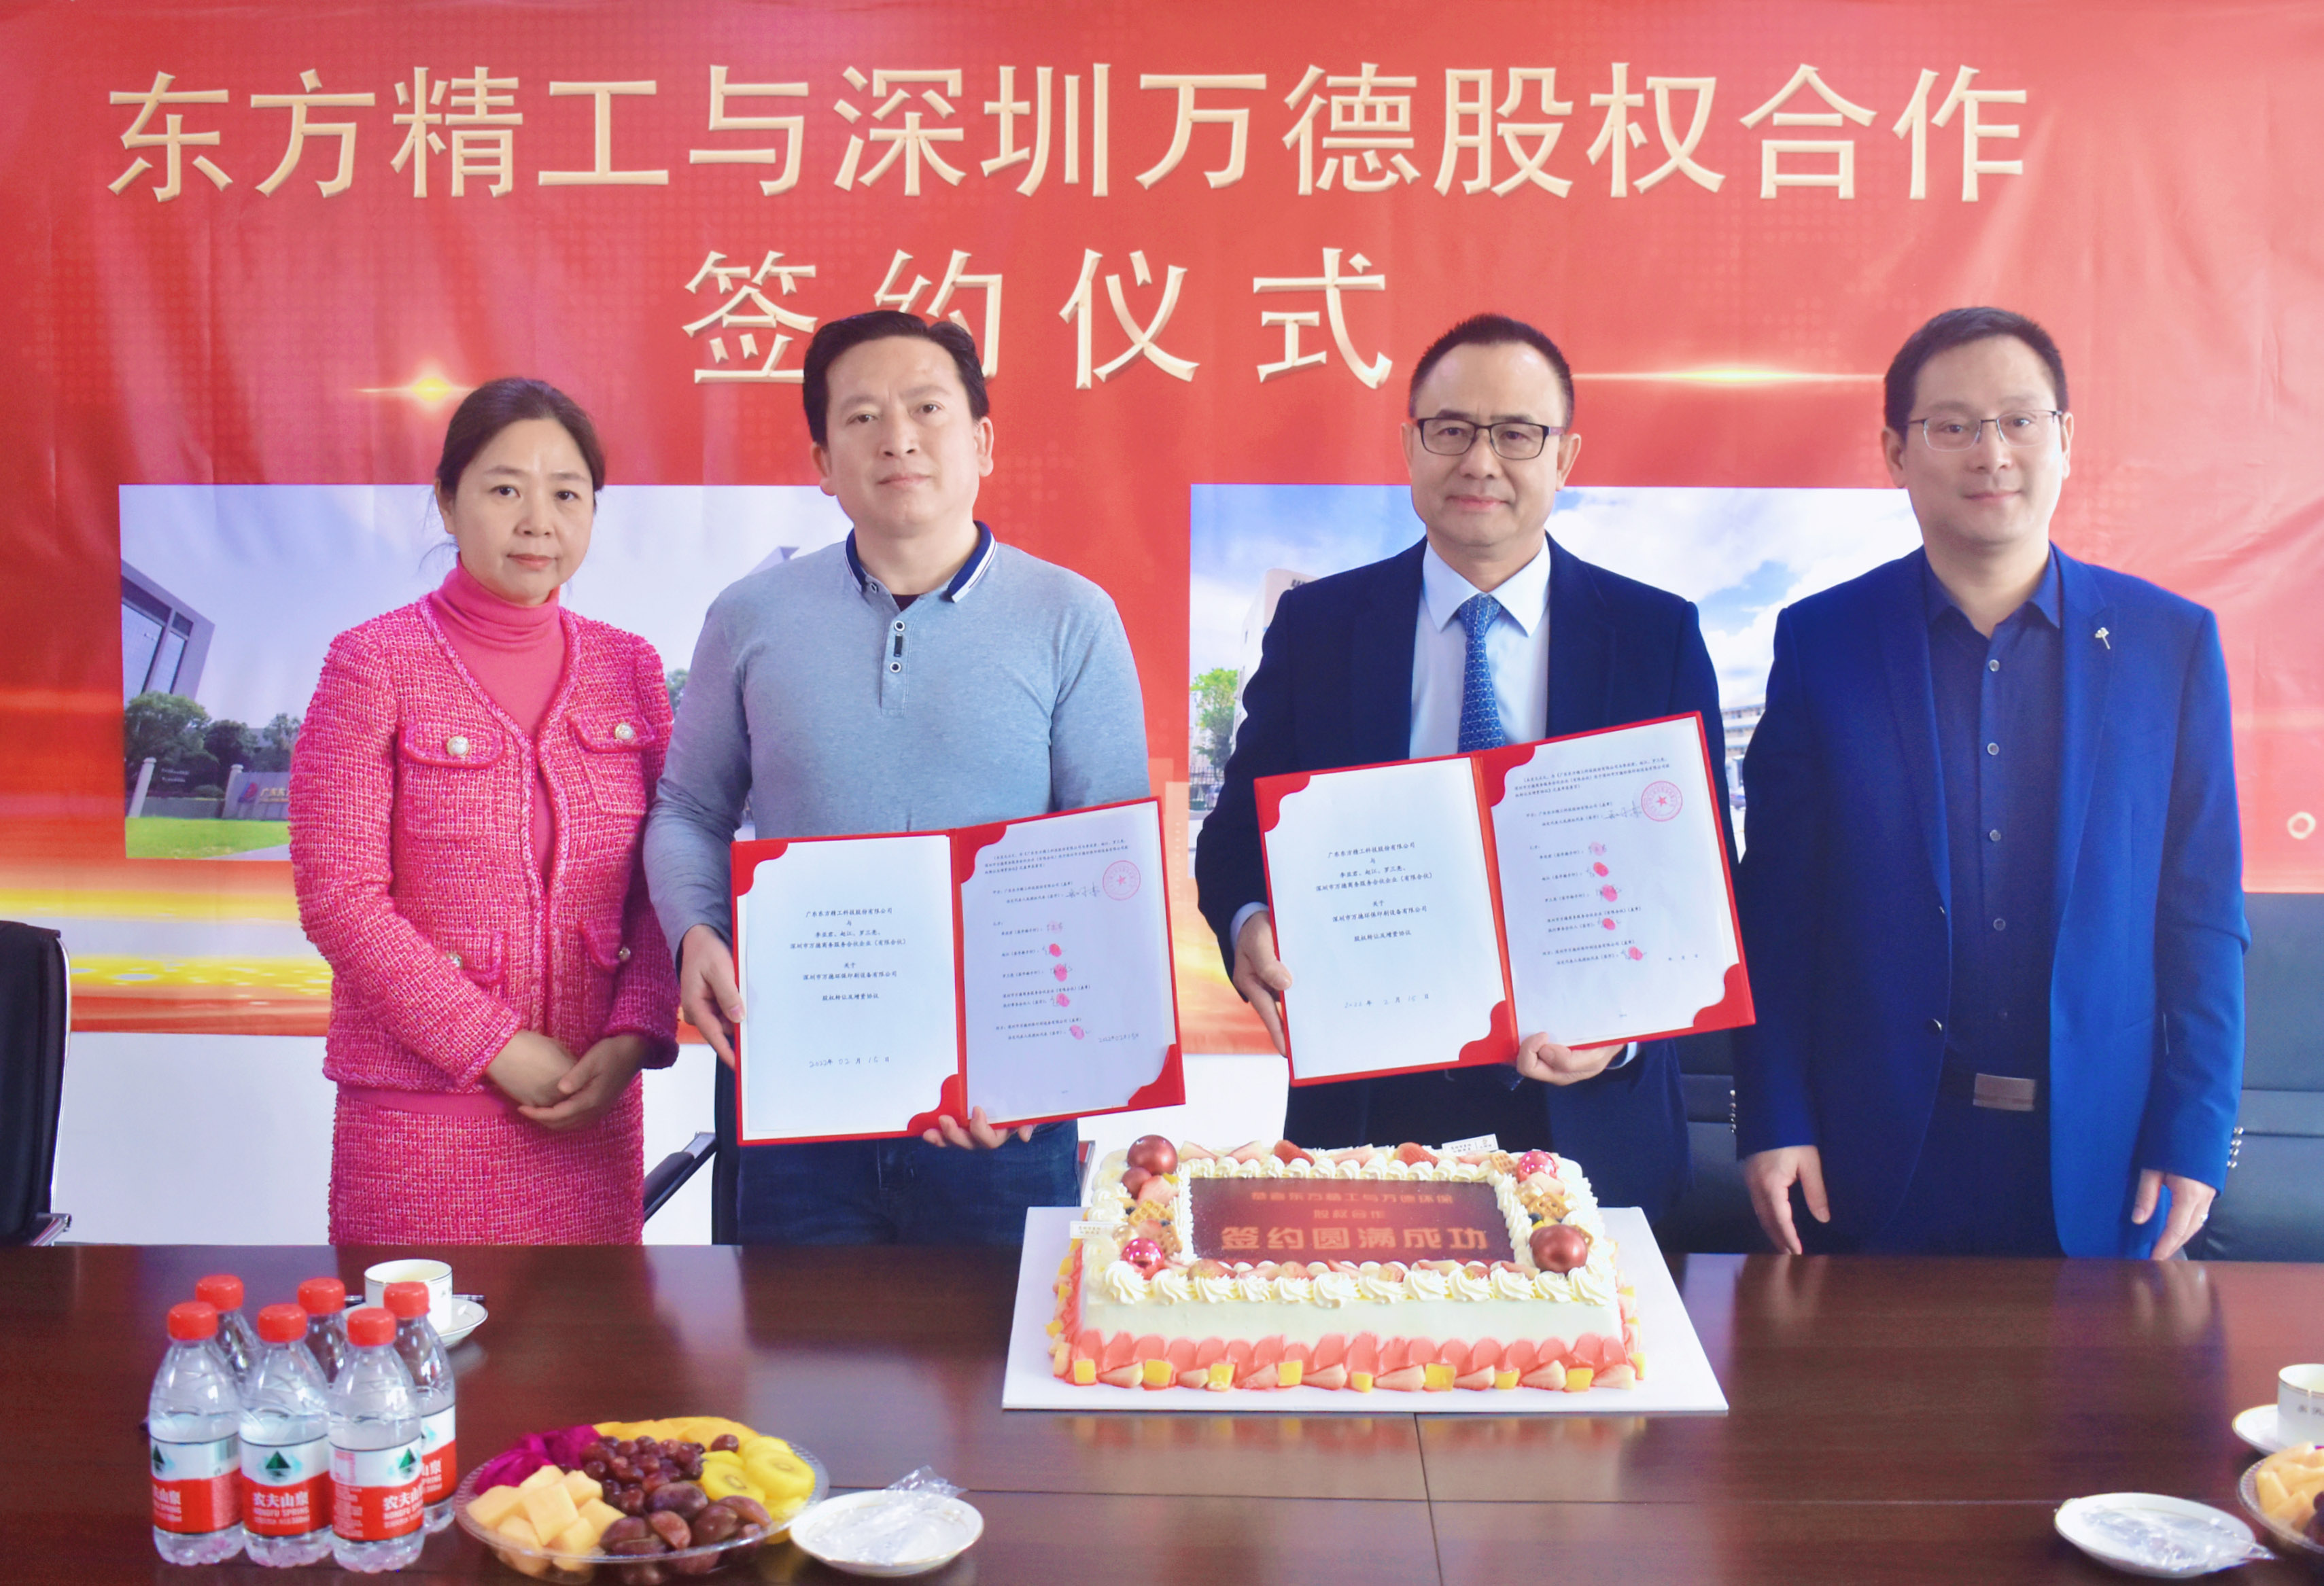 Shenzhen Wonder cooperates with Dongfang Precision Group, digital printing redouble power